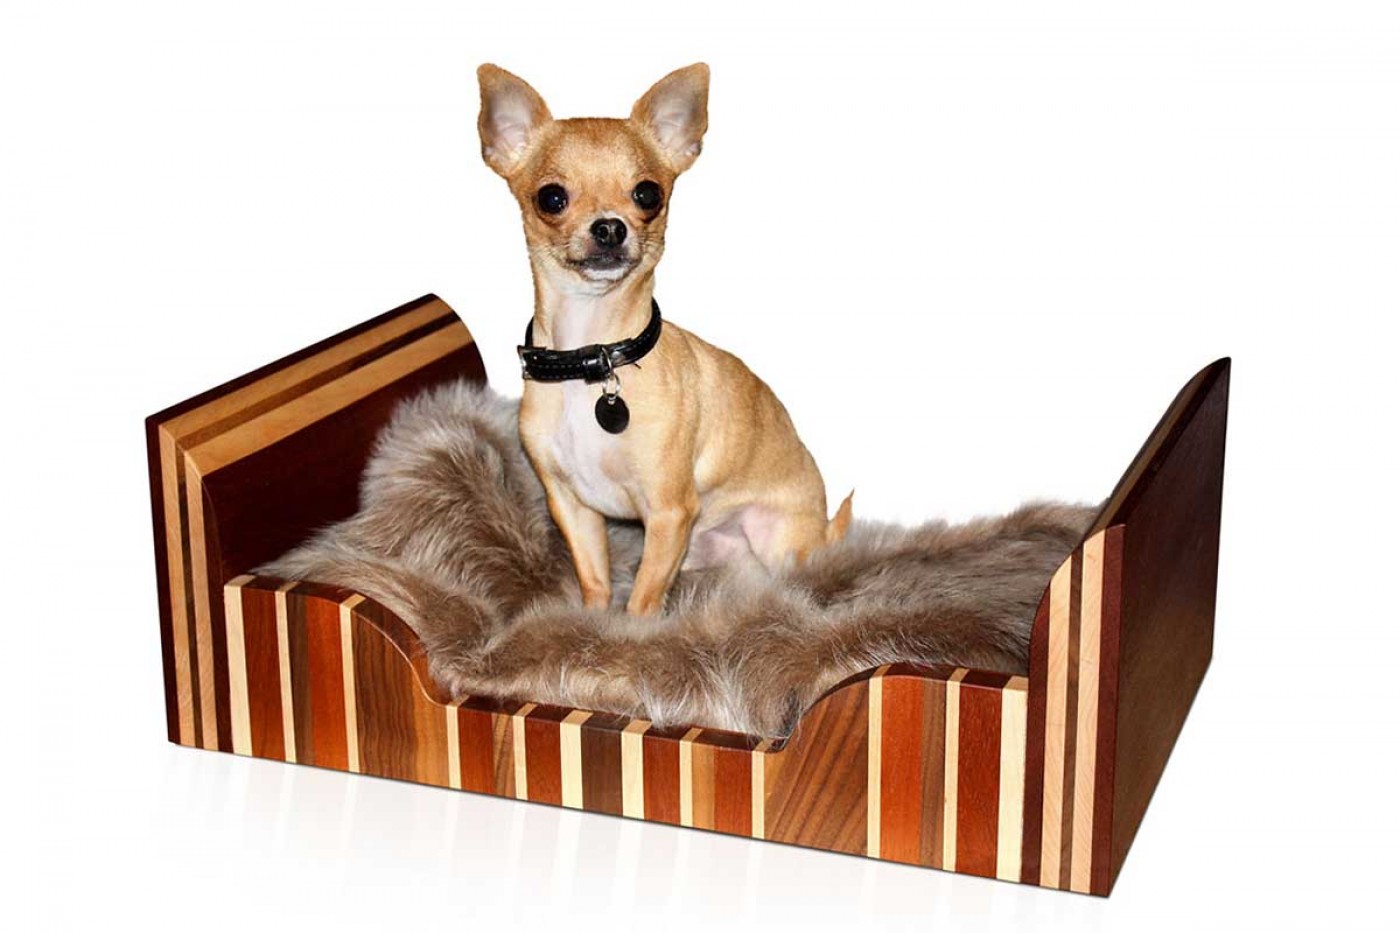 'Canoodle' (Krailler Collection) | Solid wood doggy bed